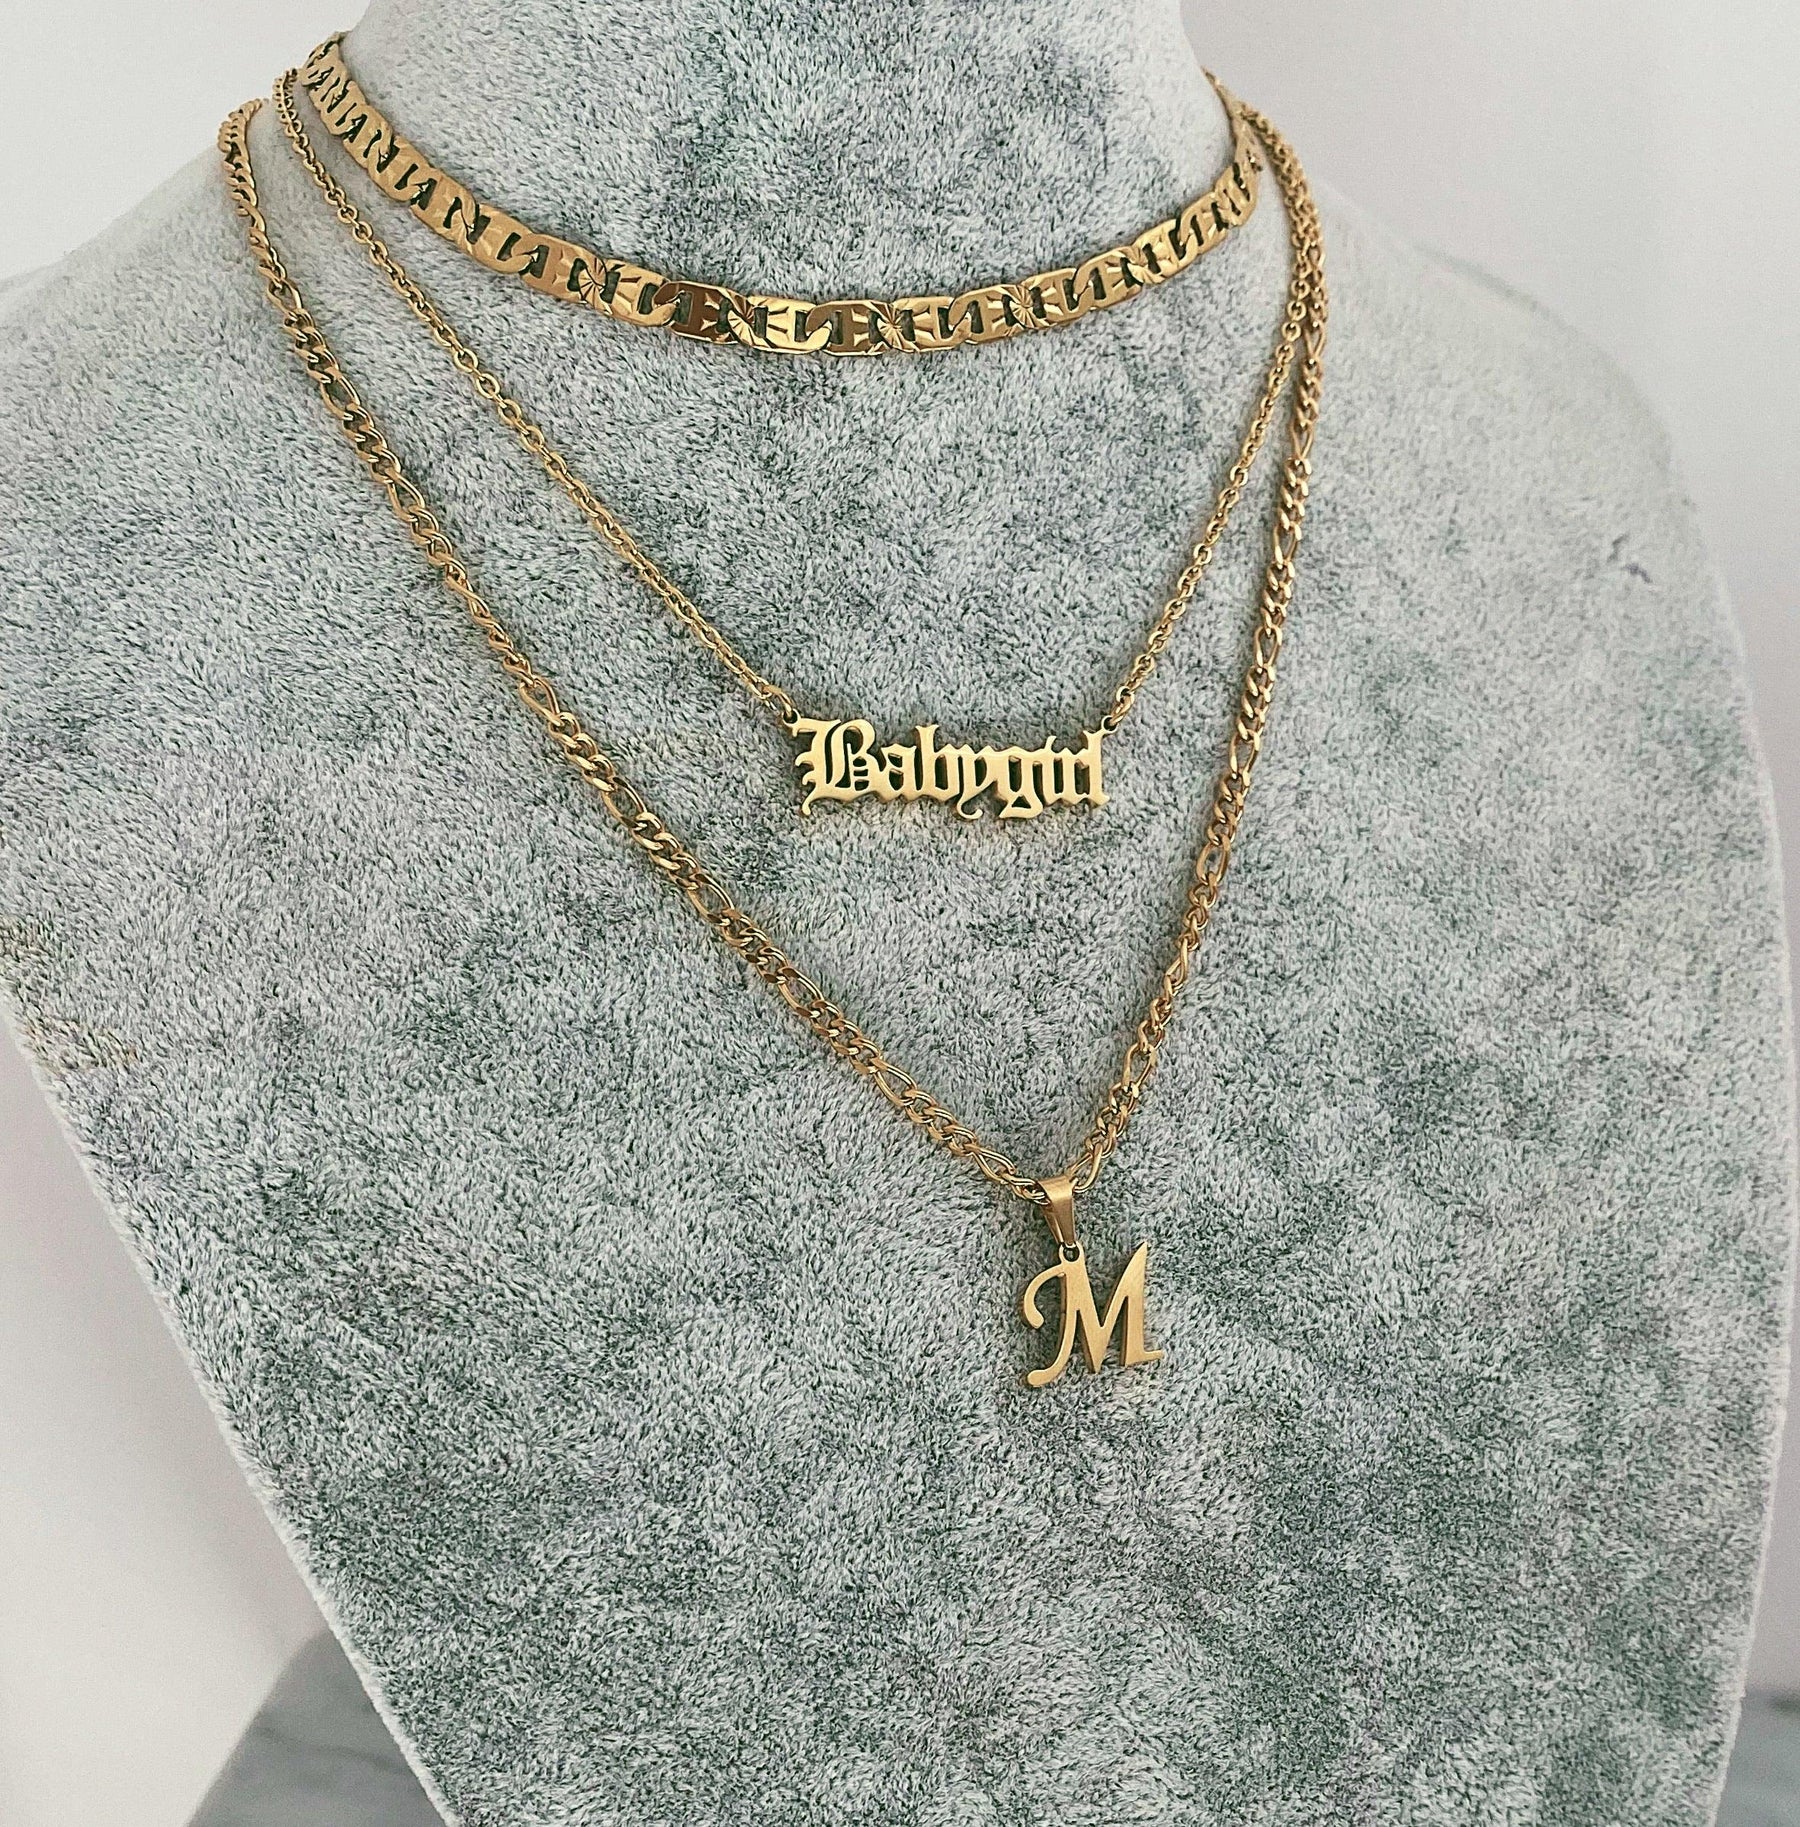 BohoMoon Stainless Steel River Initial Choker / Necklace